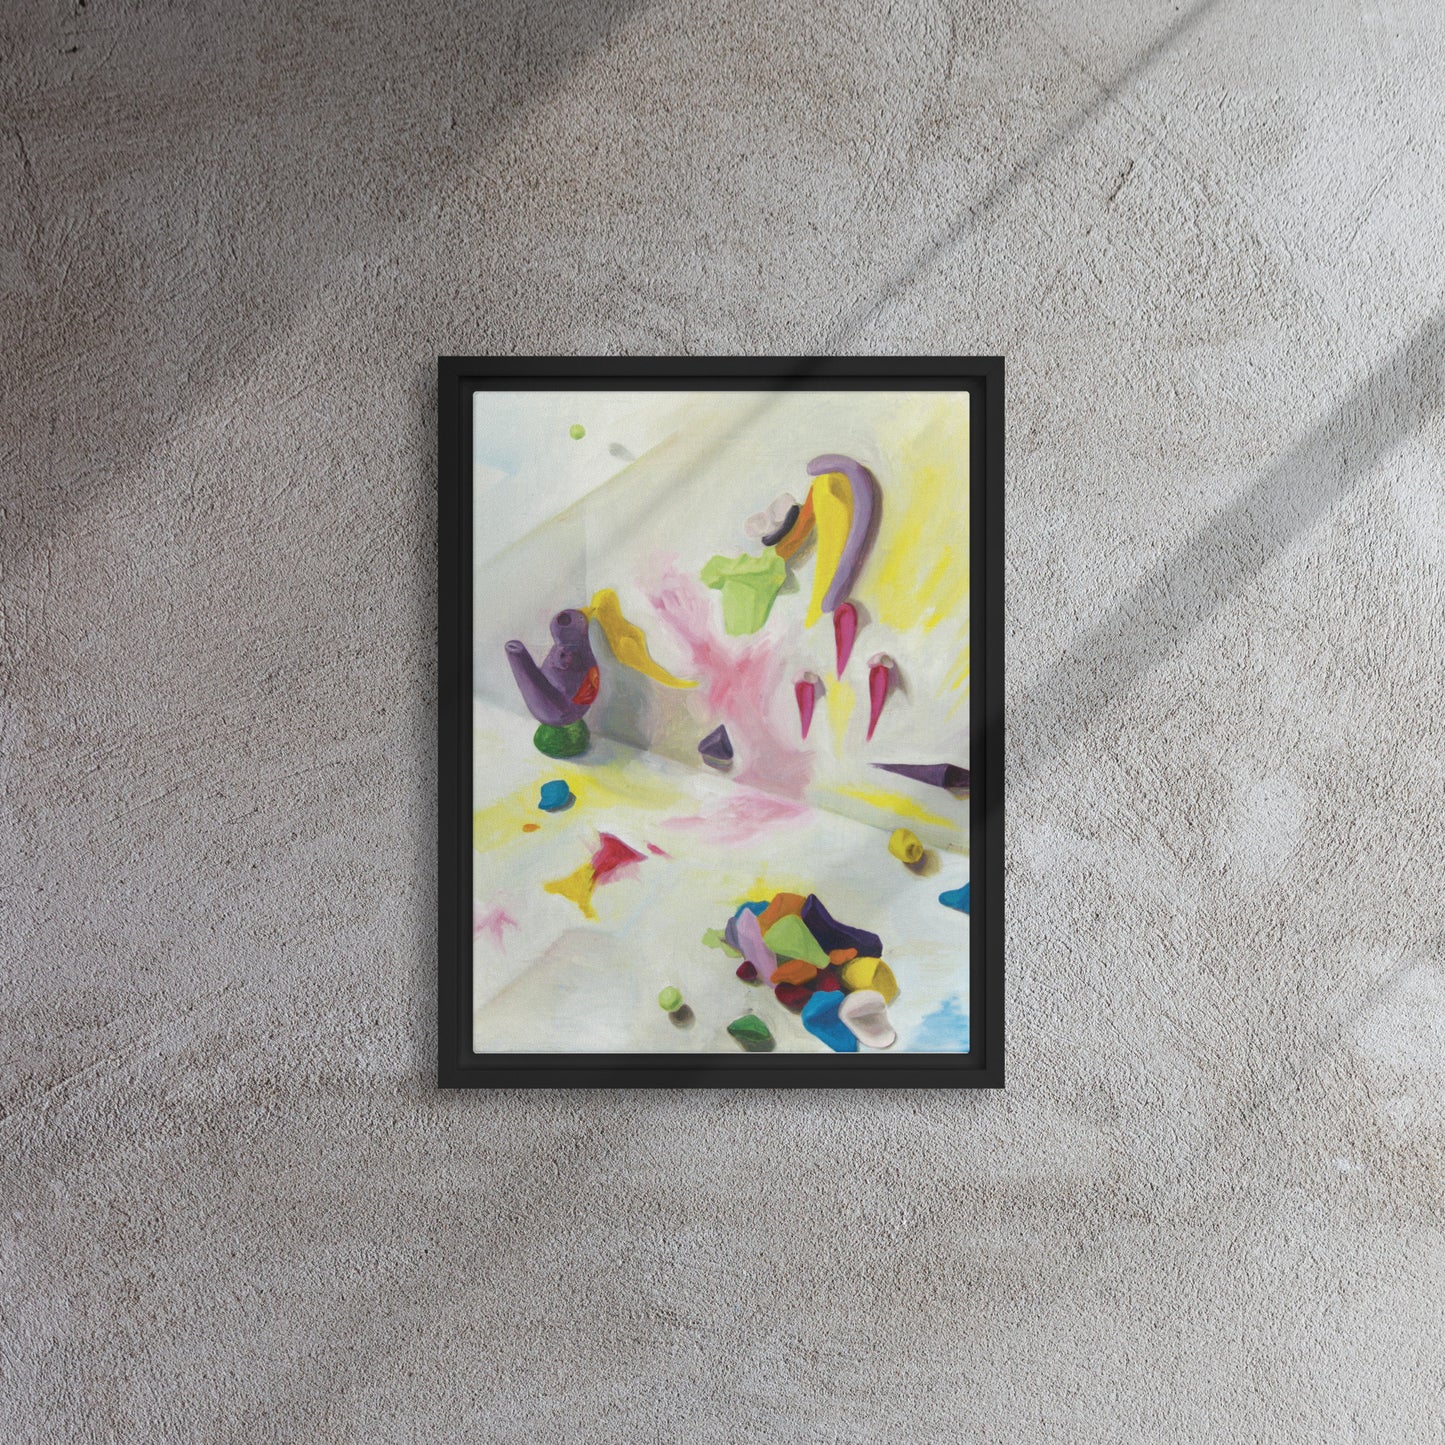 Piles of Laundry 3 -2015- Framed Canvas Print - Oil Painting Print